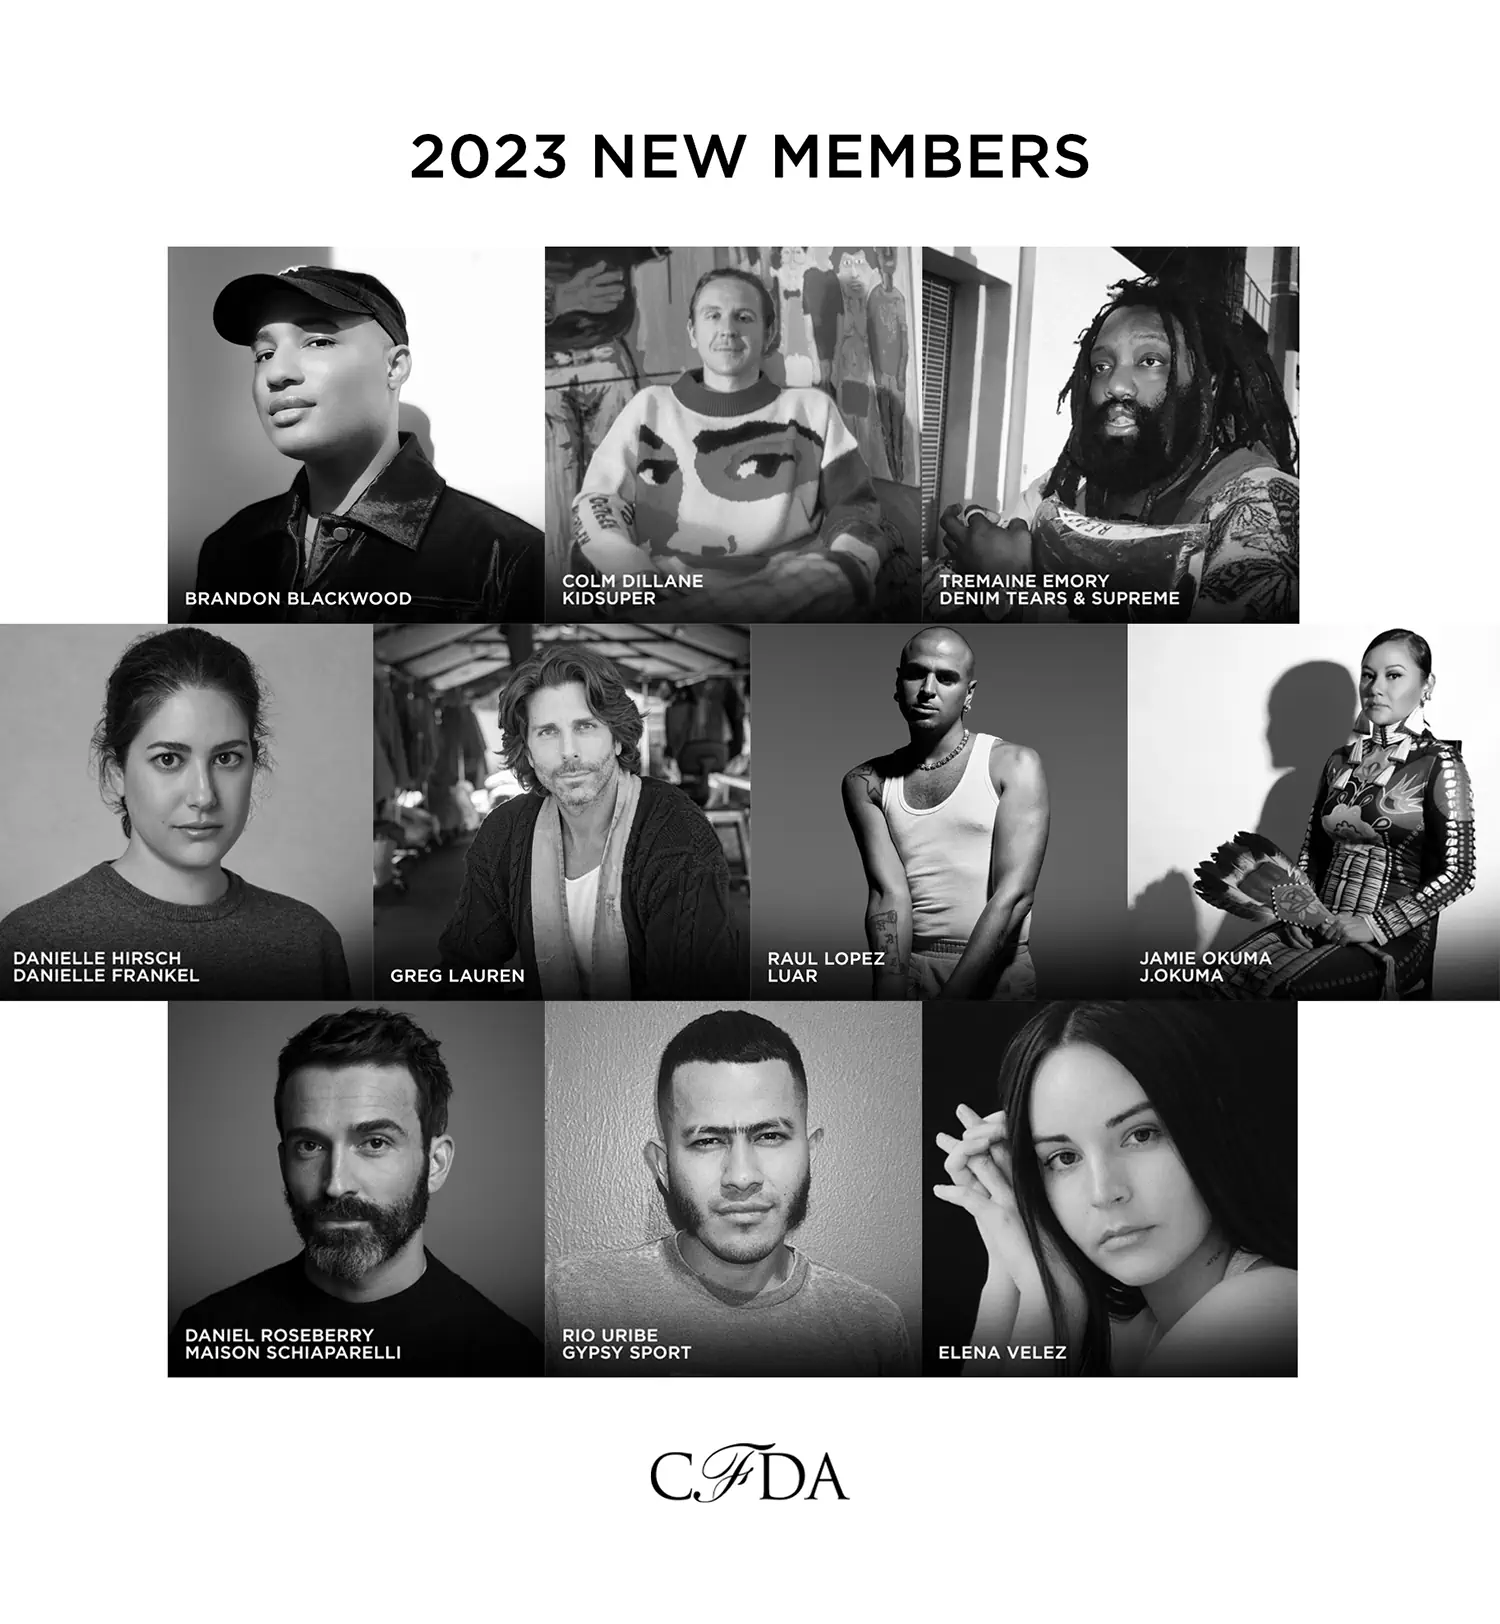 CFDA's fresh faces of 2023